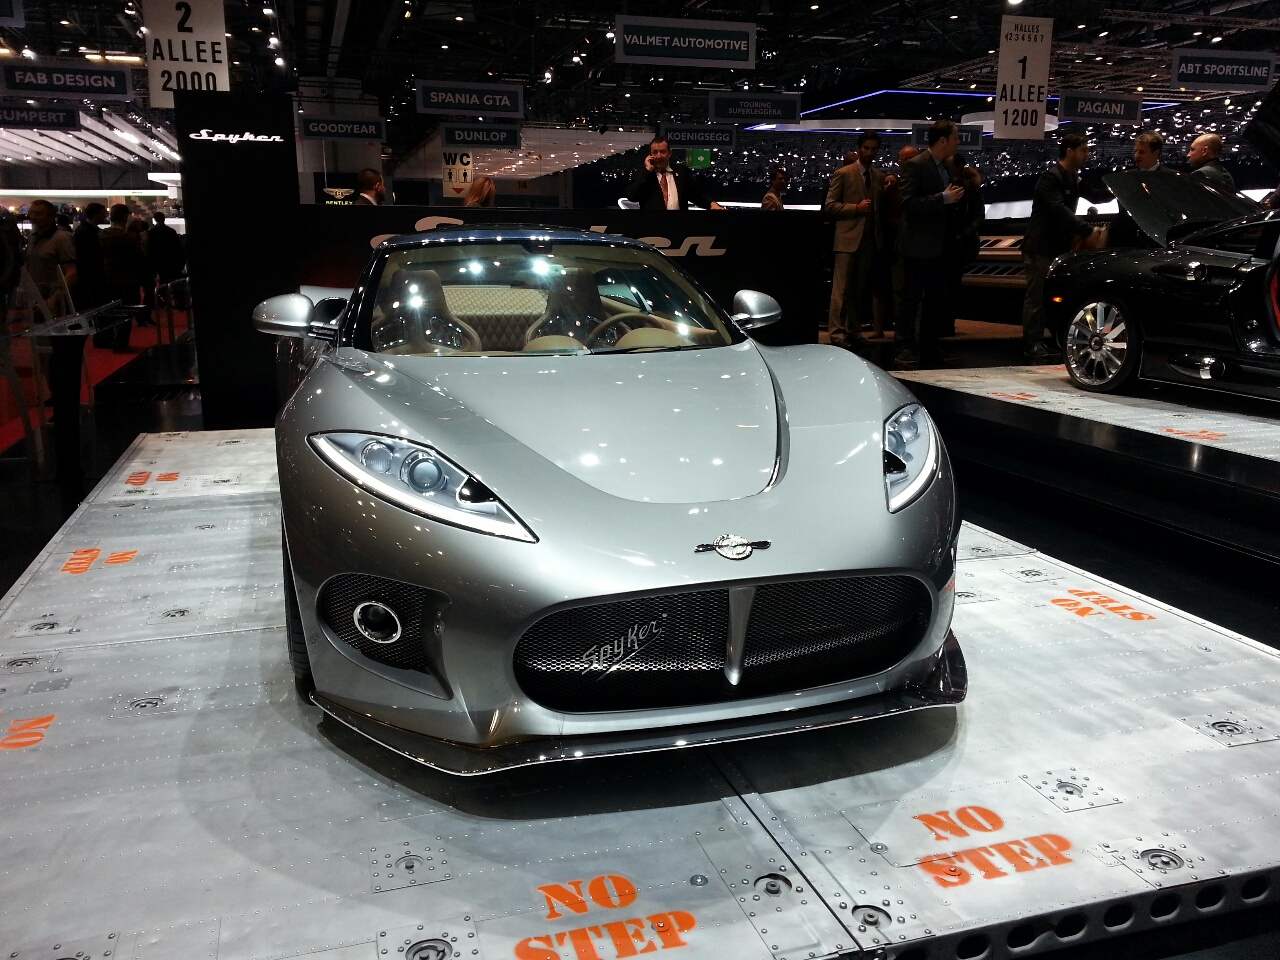 Spyker B6 Venator To Cost $135k In New C8 And SUV On The, 55% OFF